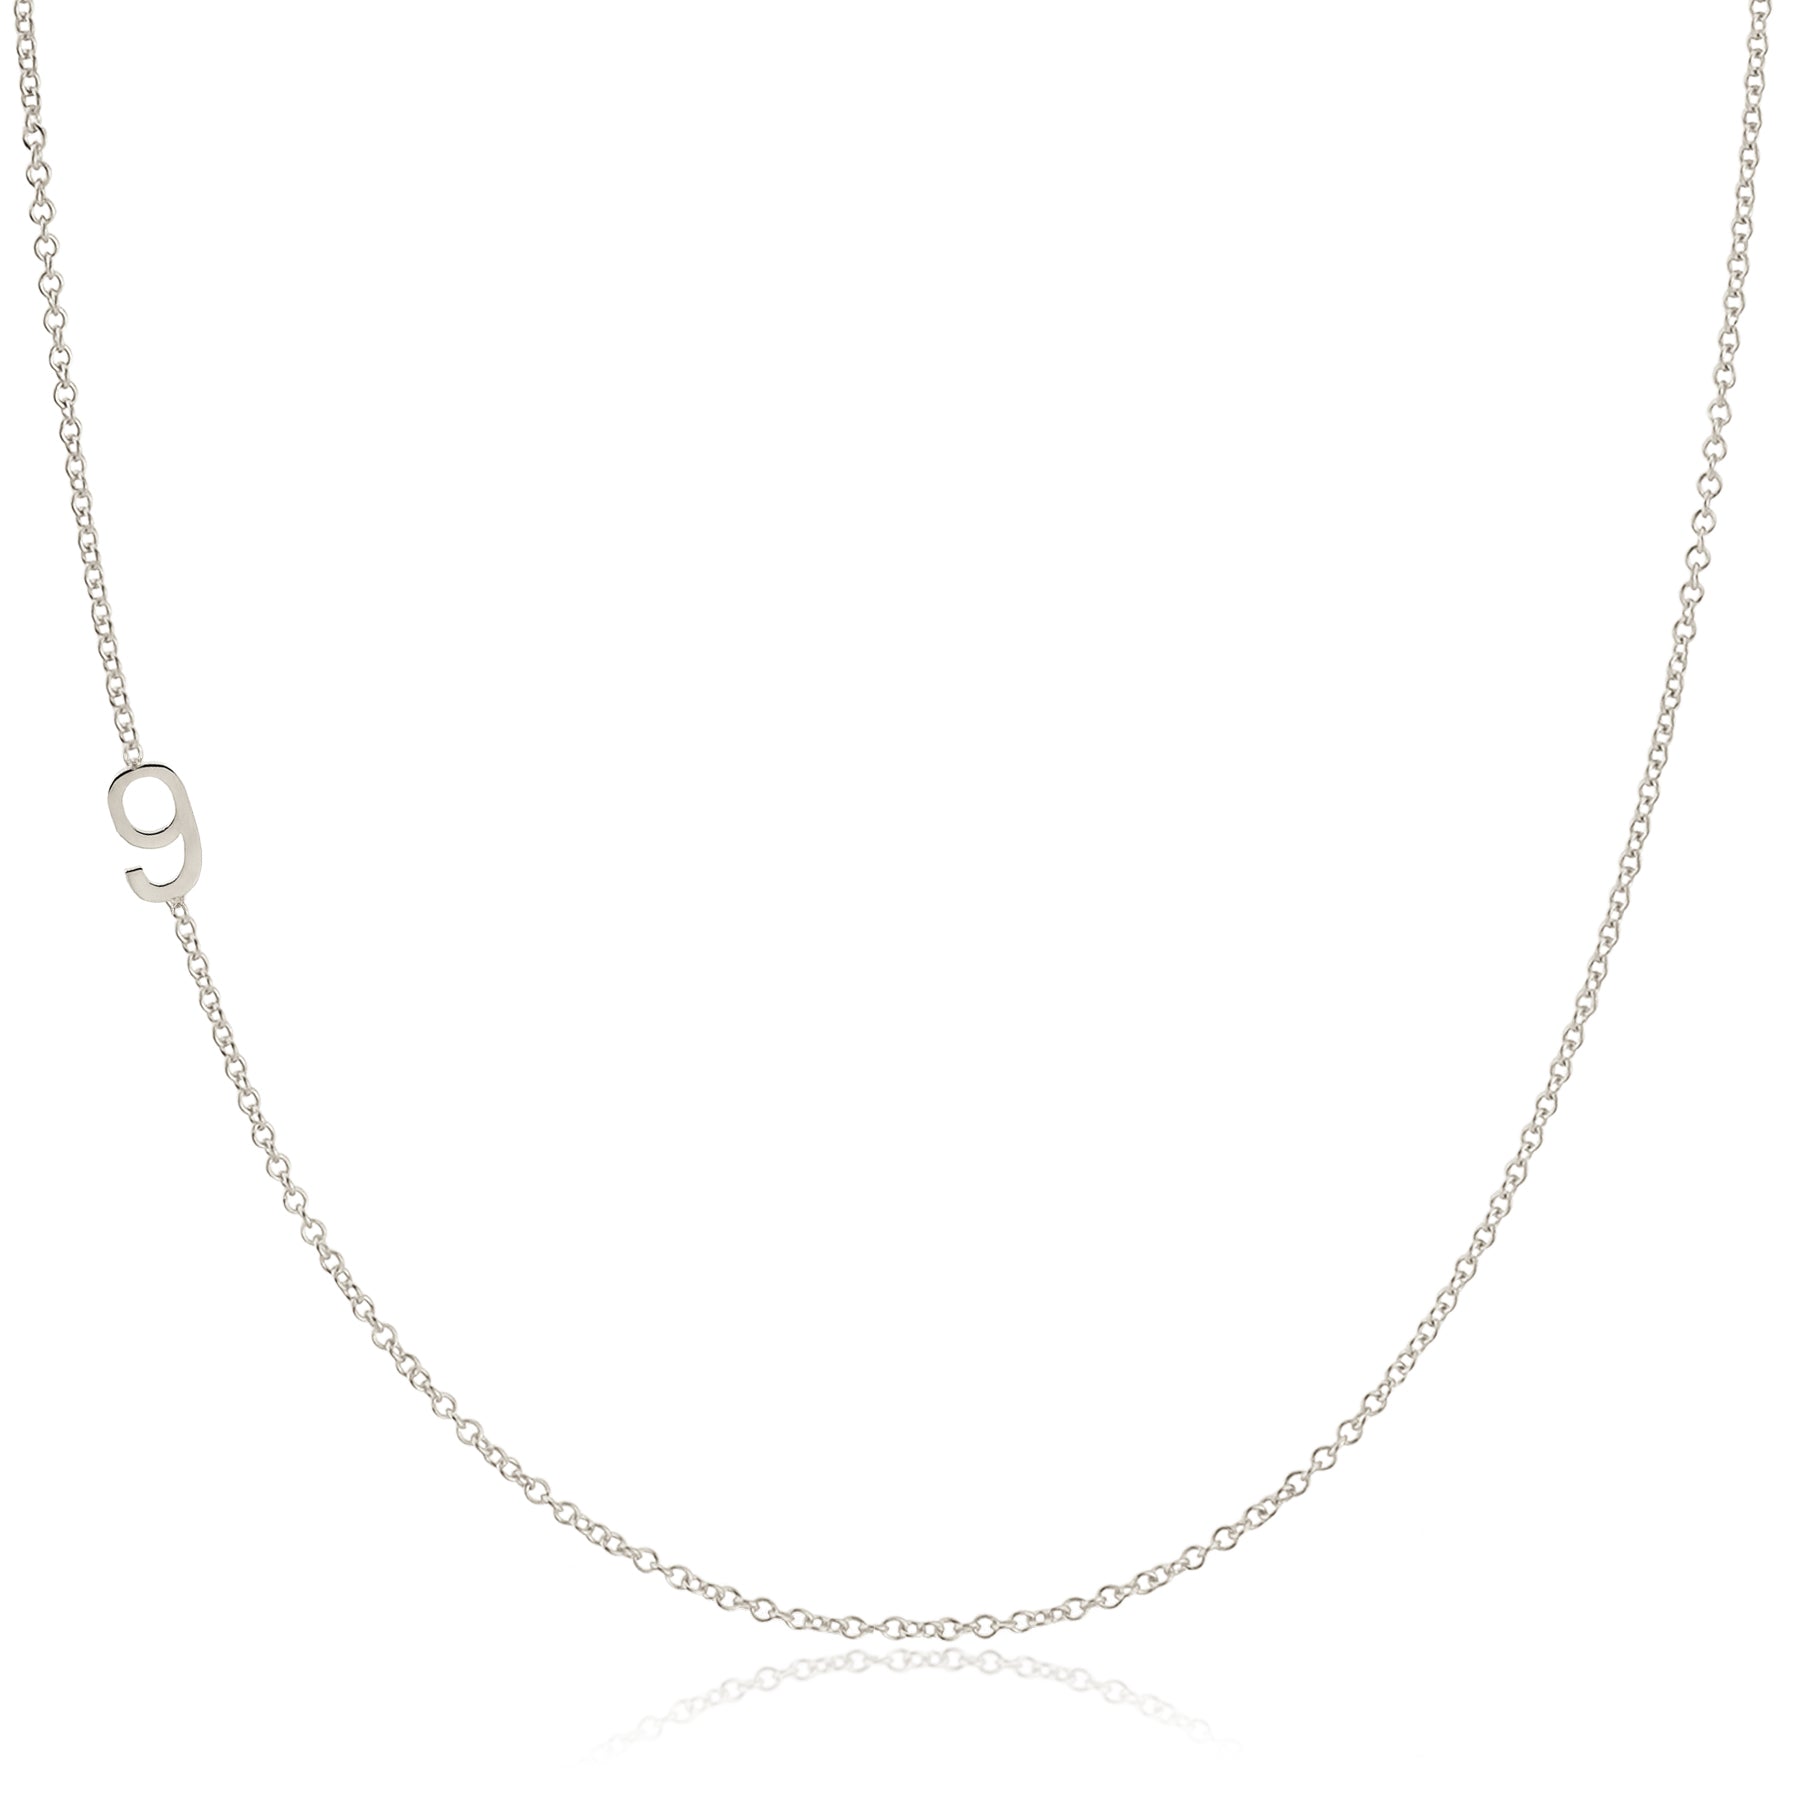 14K GOLD ASYMMETRICAL NUMBER NECKLACE - 9